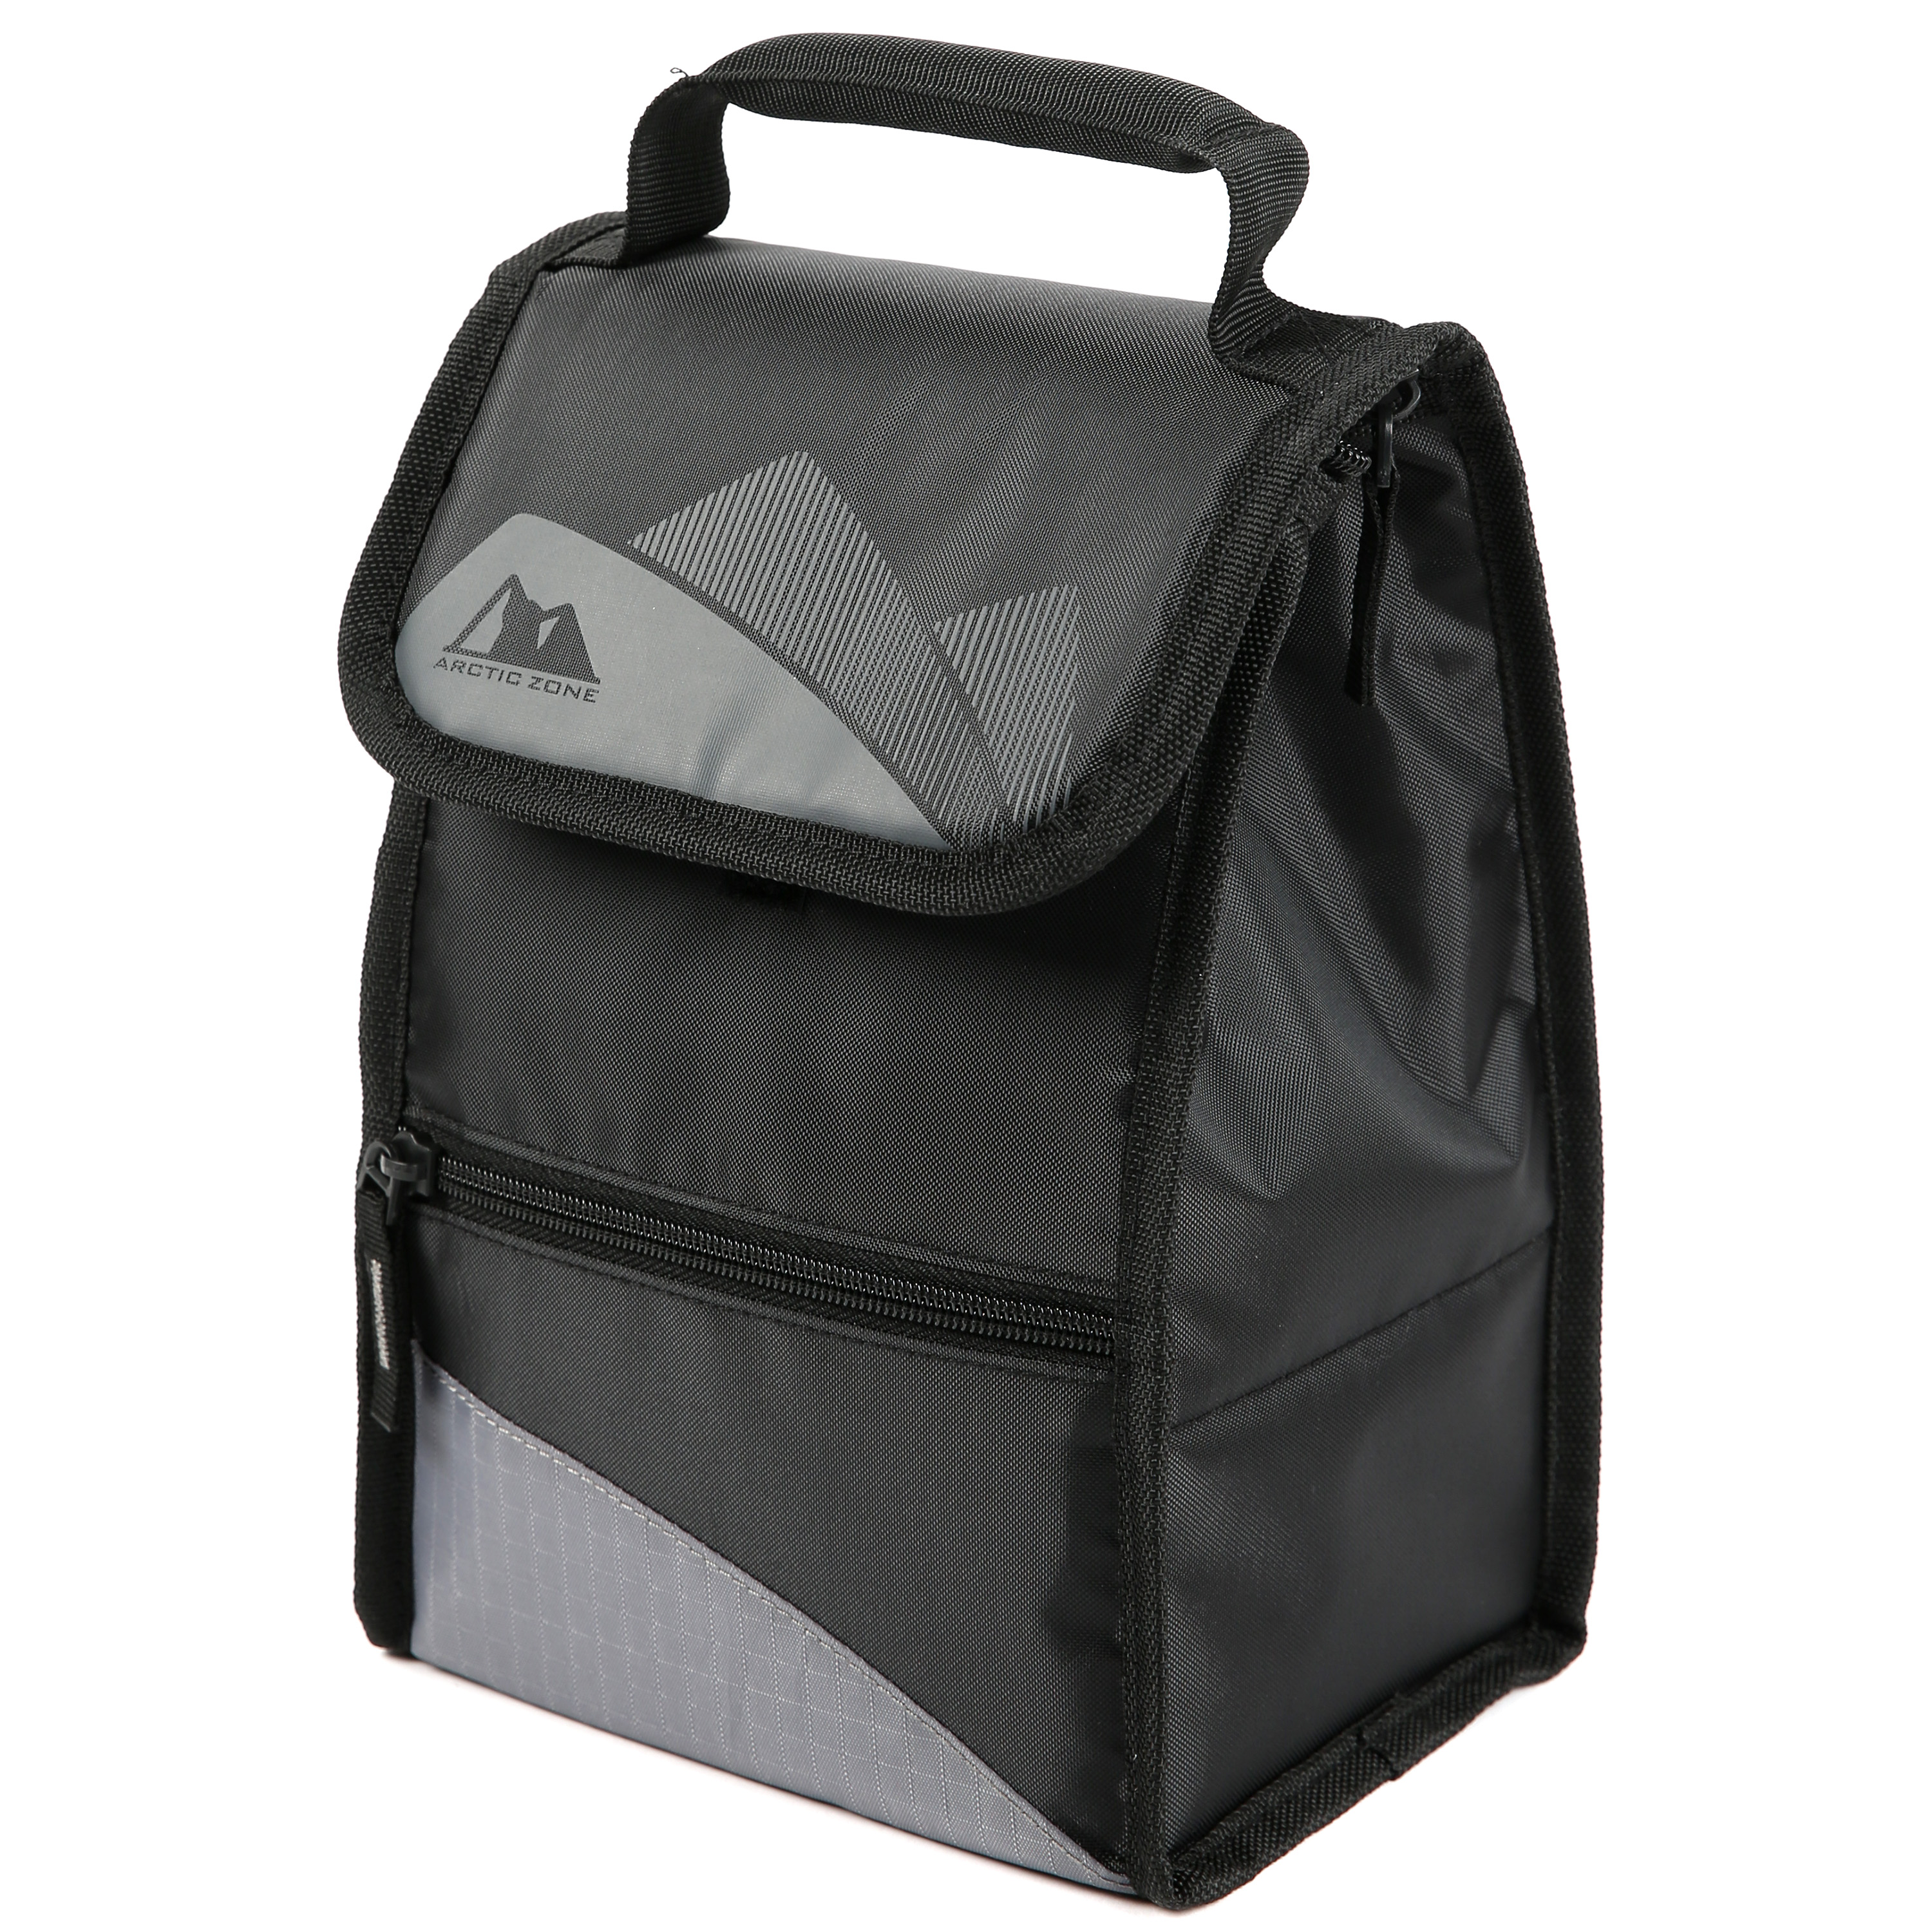 Arctic Zone Hi-Top Power Pack Lunch Pack with Food Container, Black - image 4 of 11